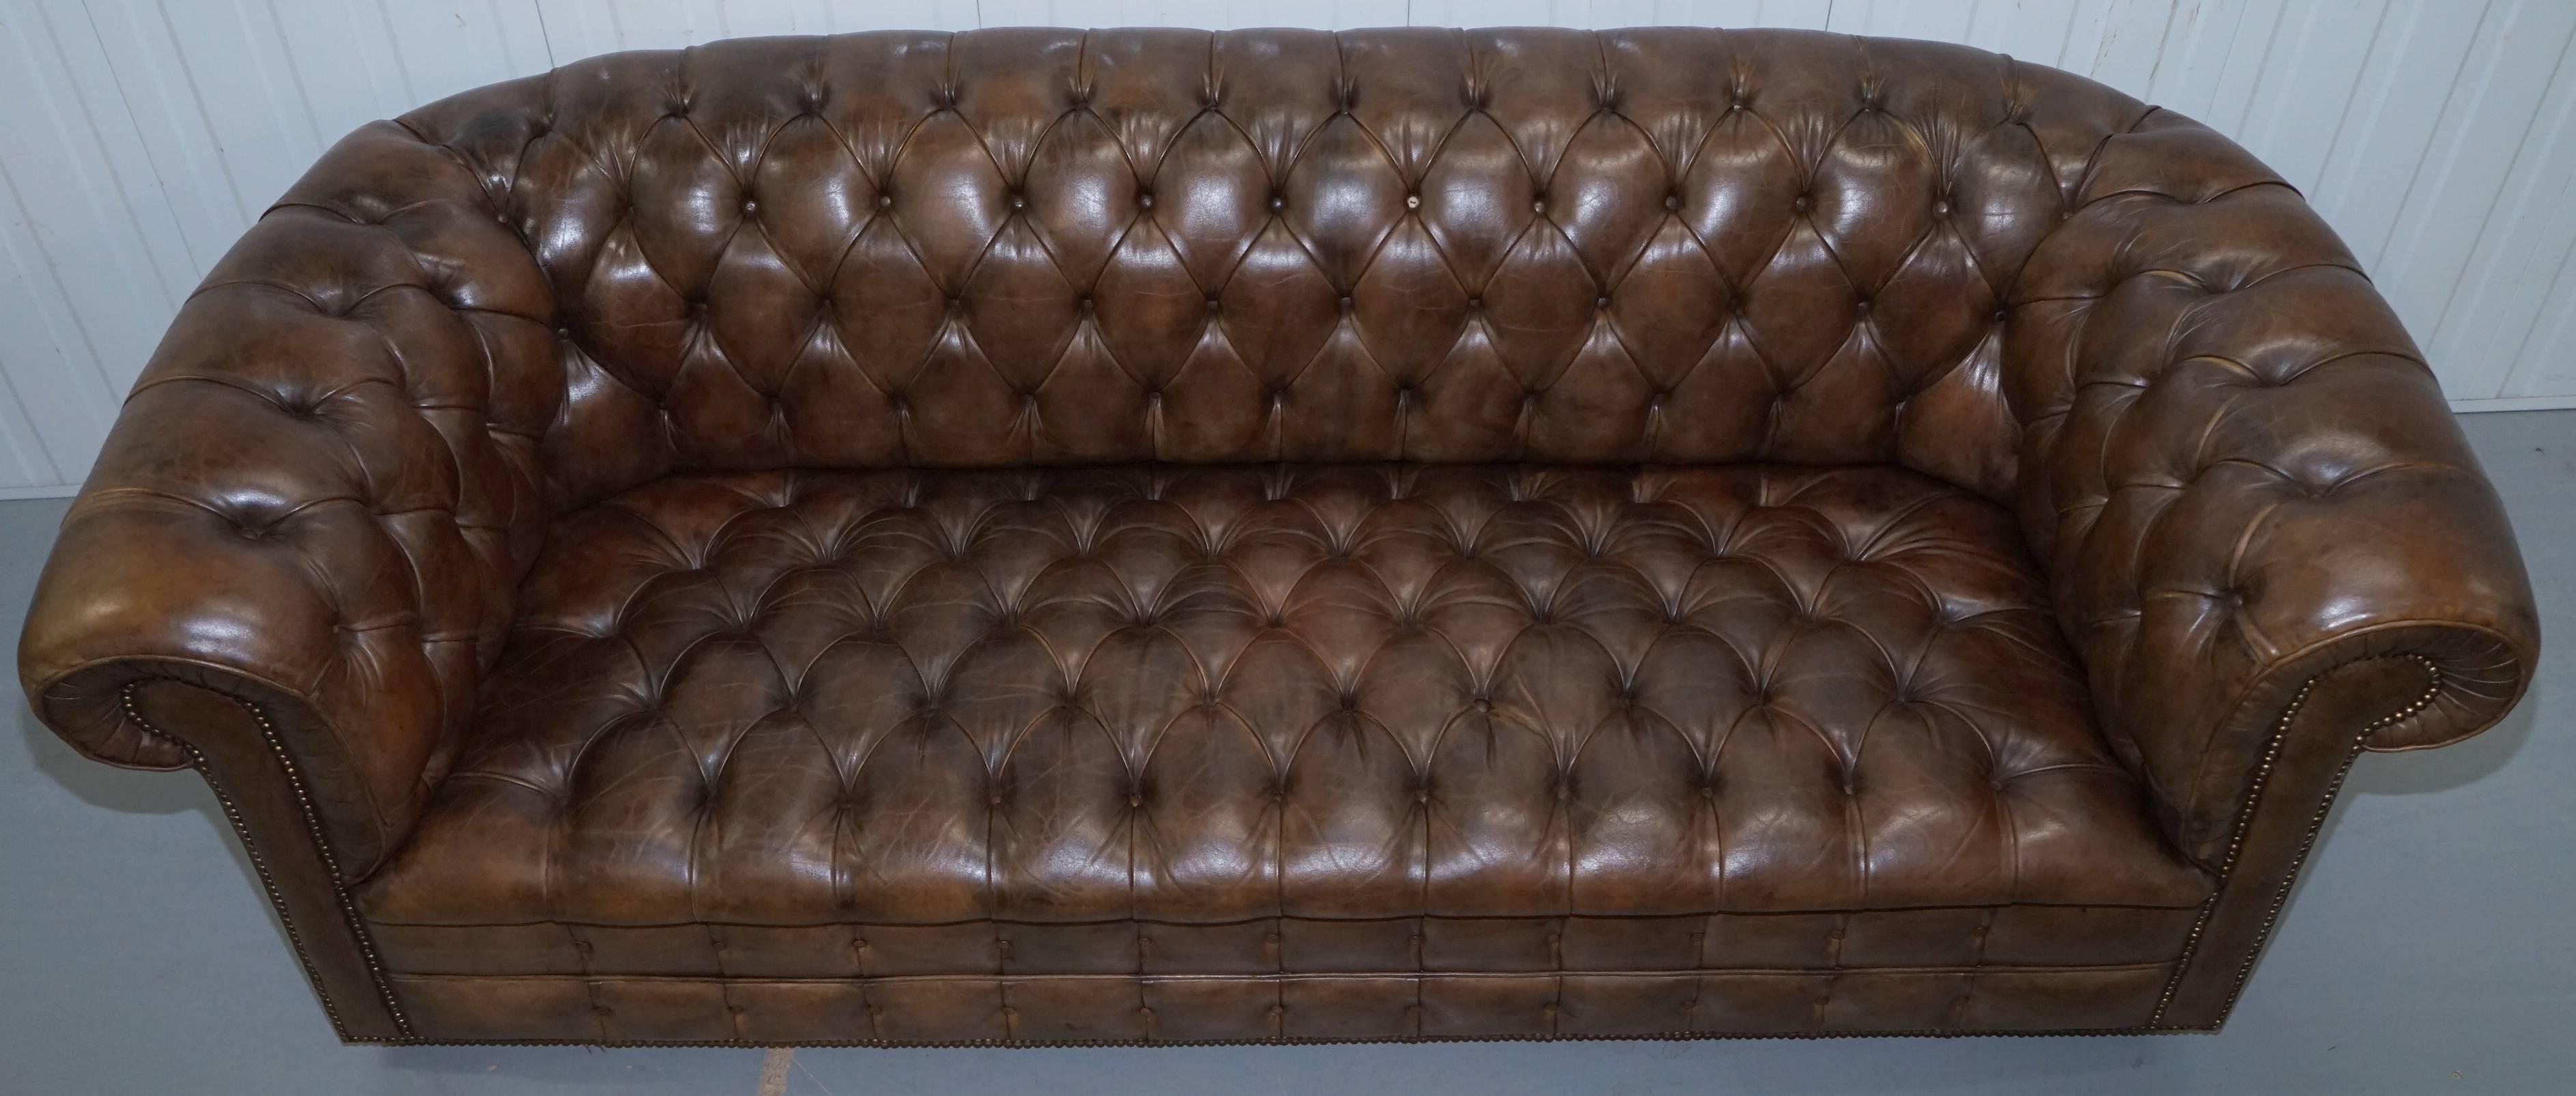 Very Rare Vintage Hand Dyed Cigar Heritage Brown Leather Chesterfield Club Sofa 1